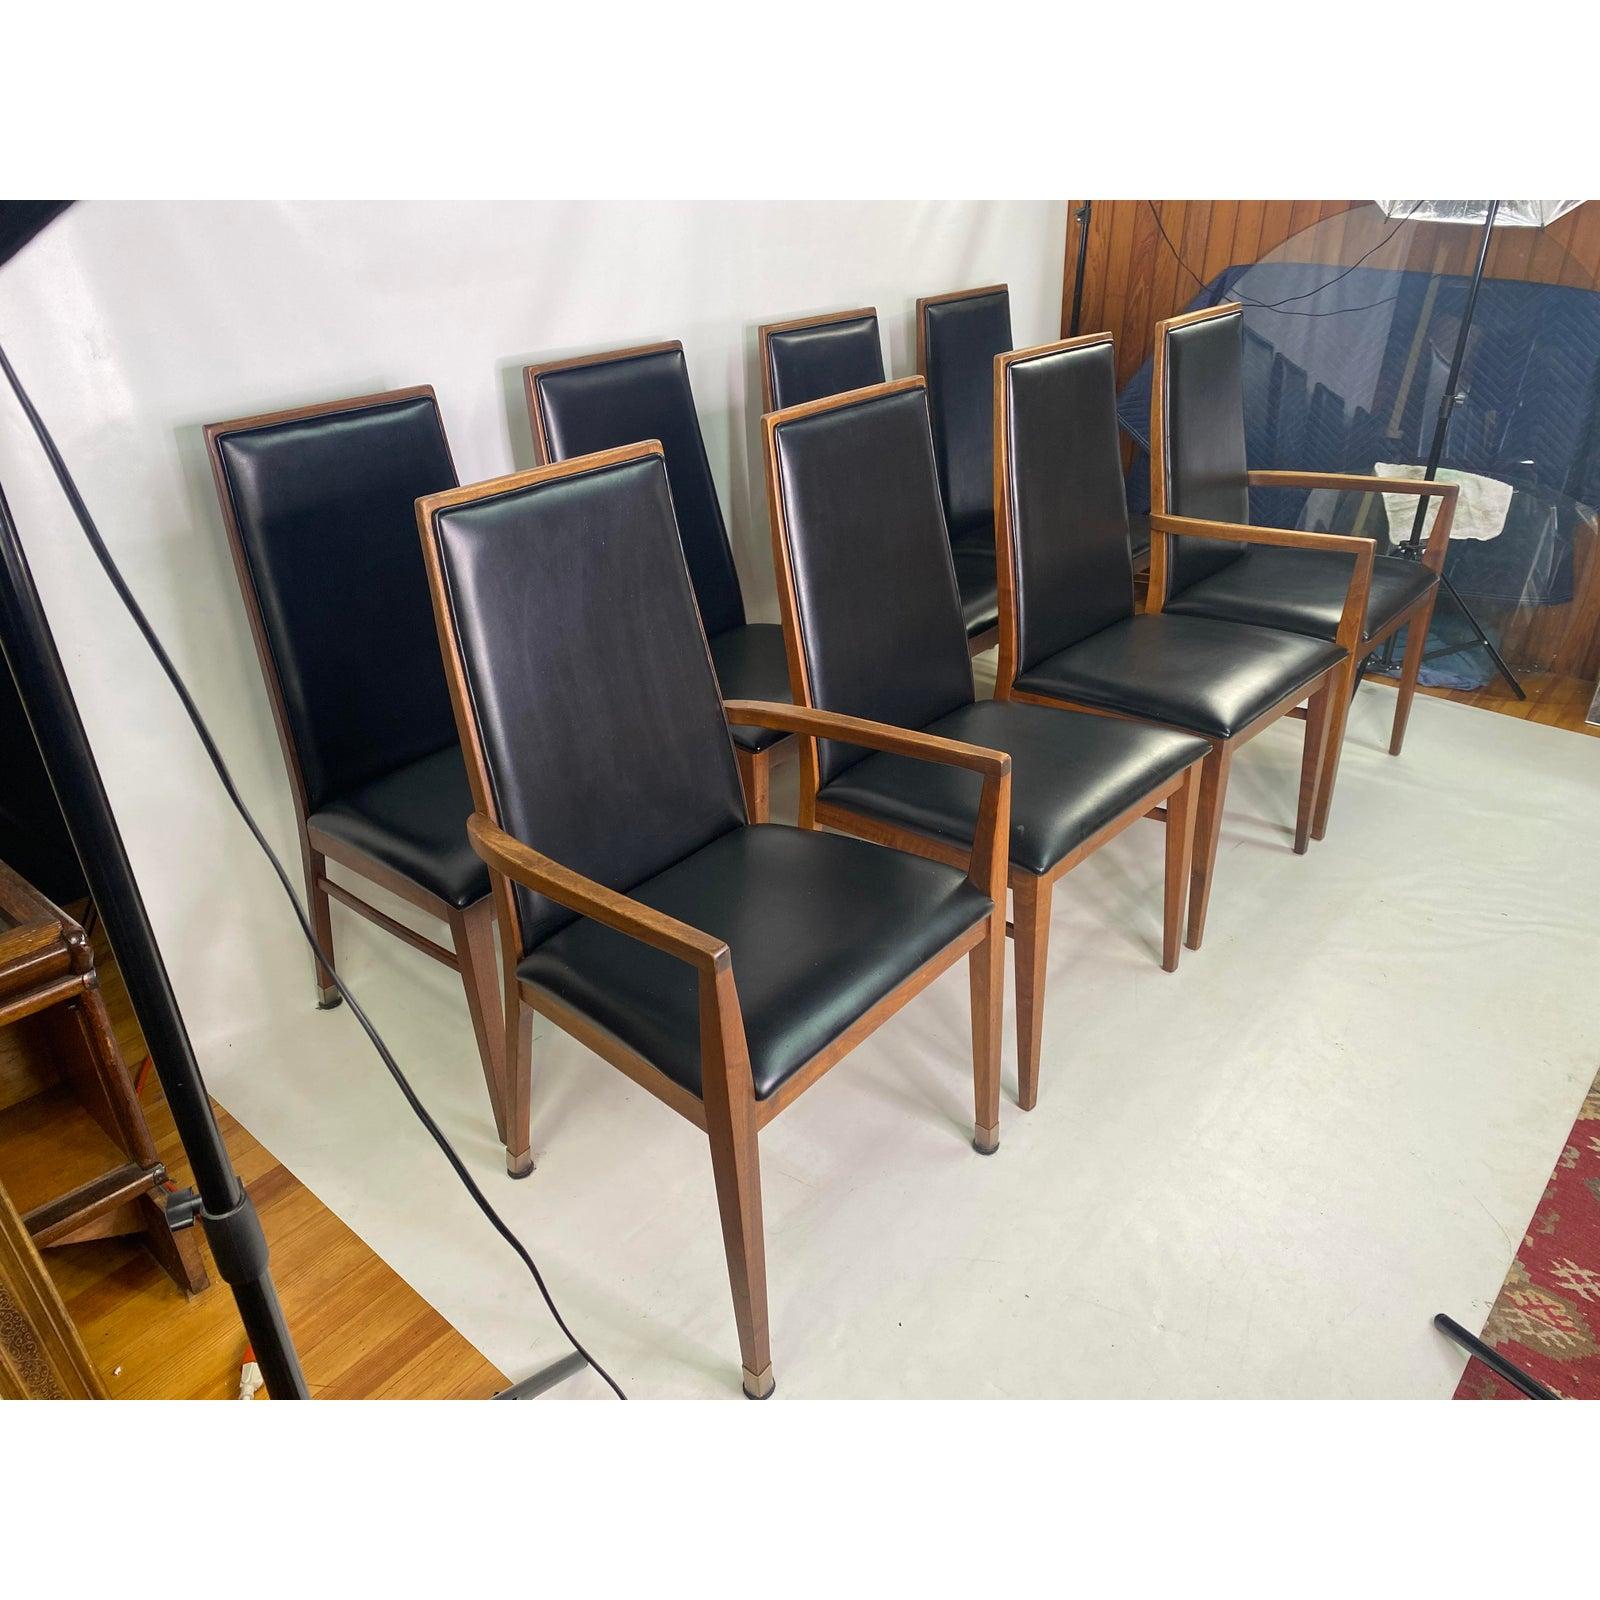 Milo Baughman style walnut dining chairs by Dillingham - Set of 8.